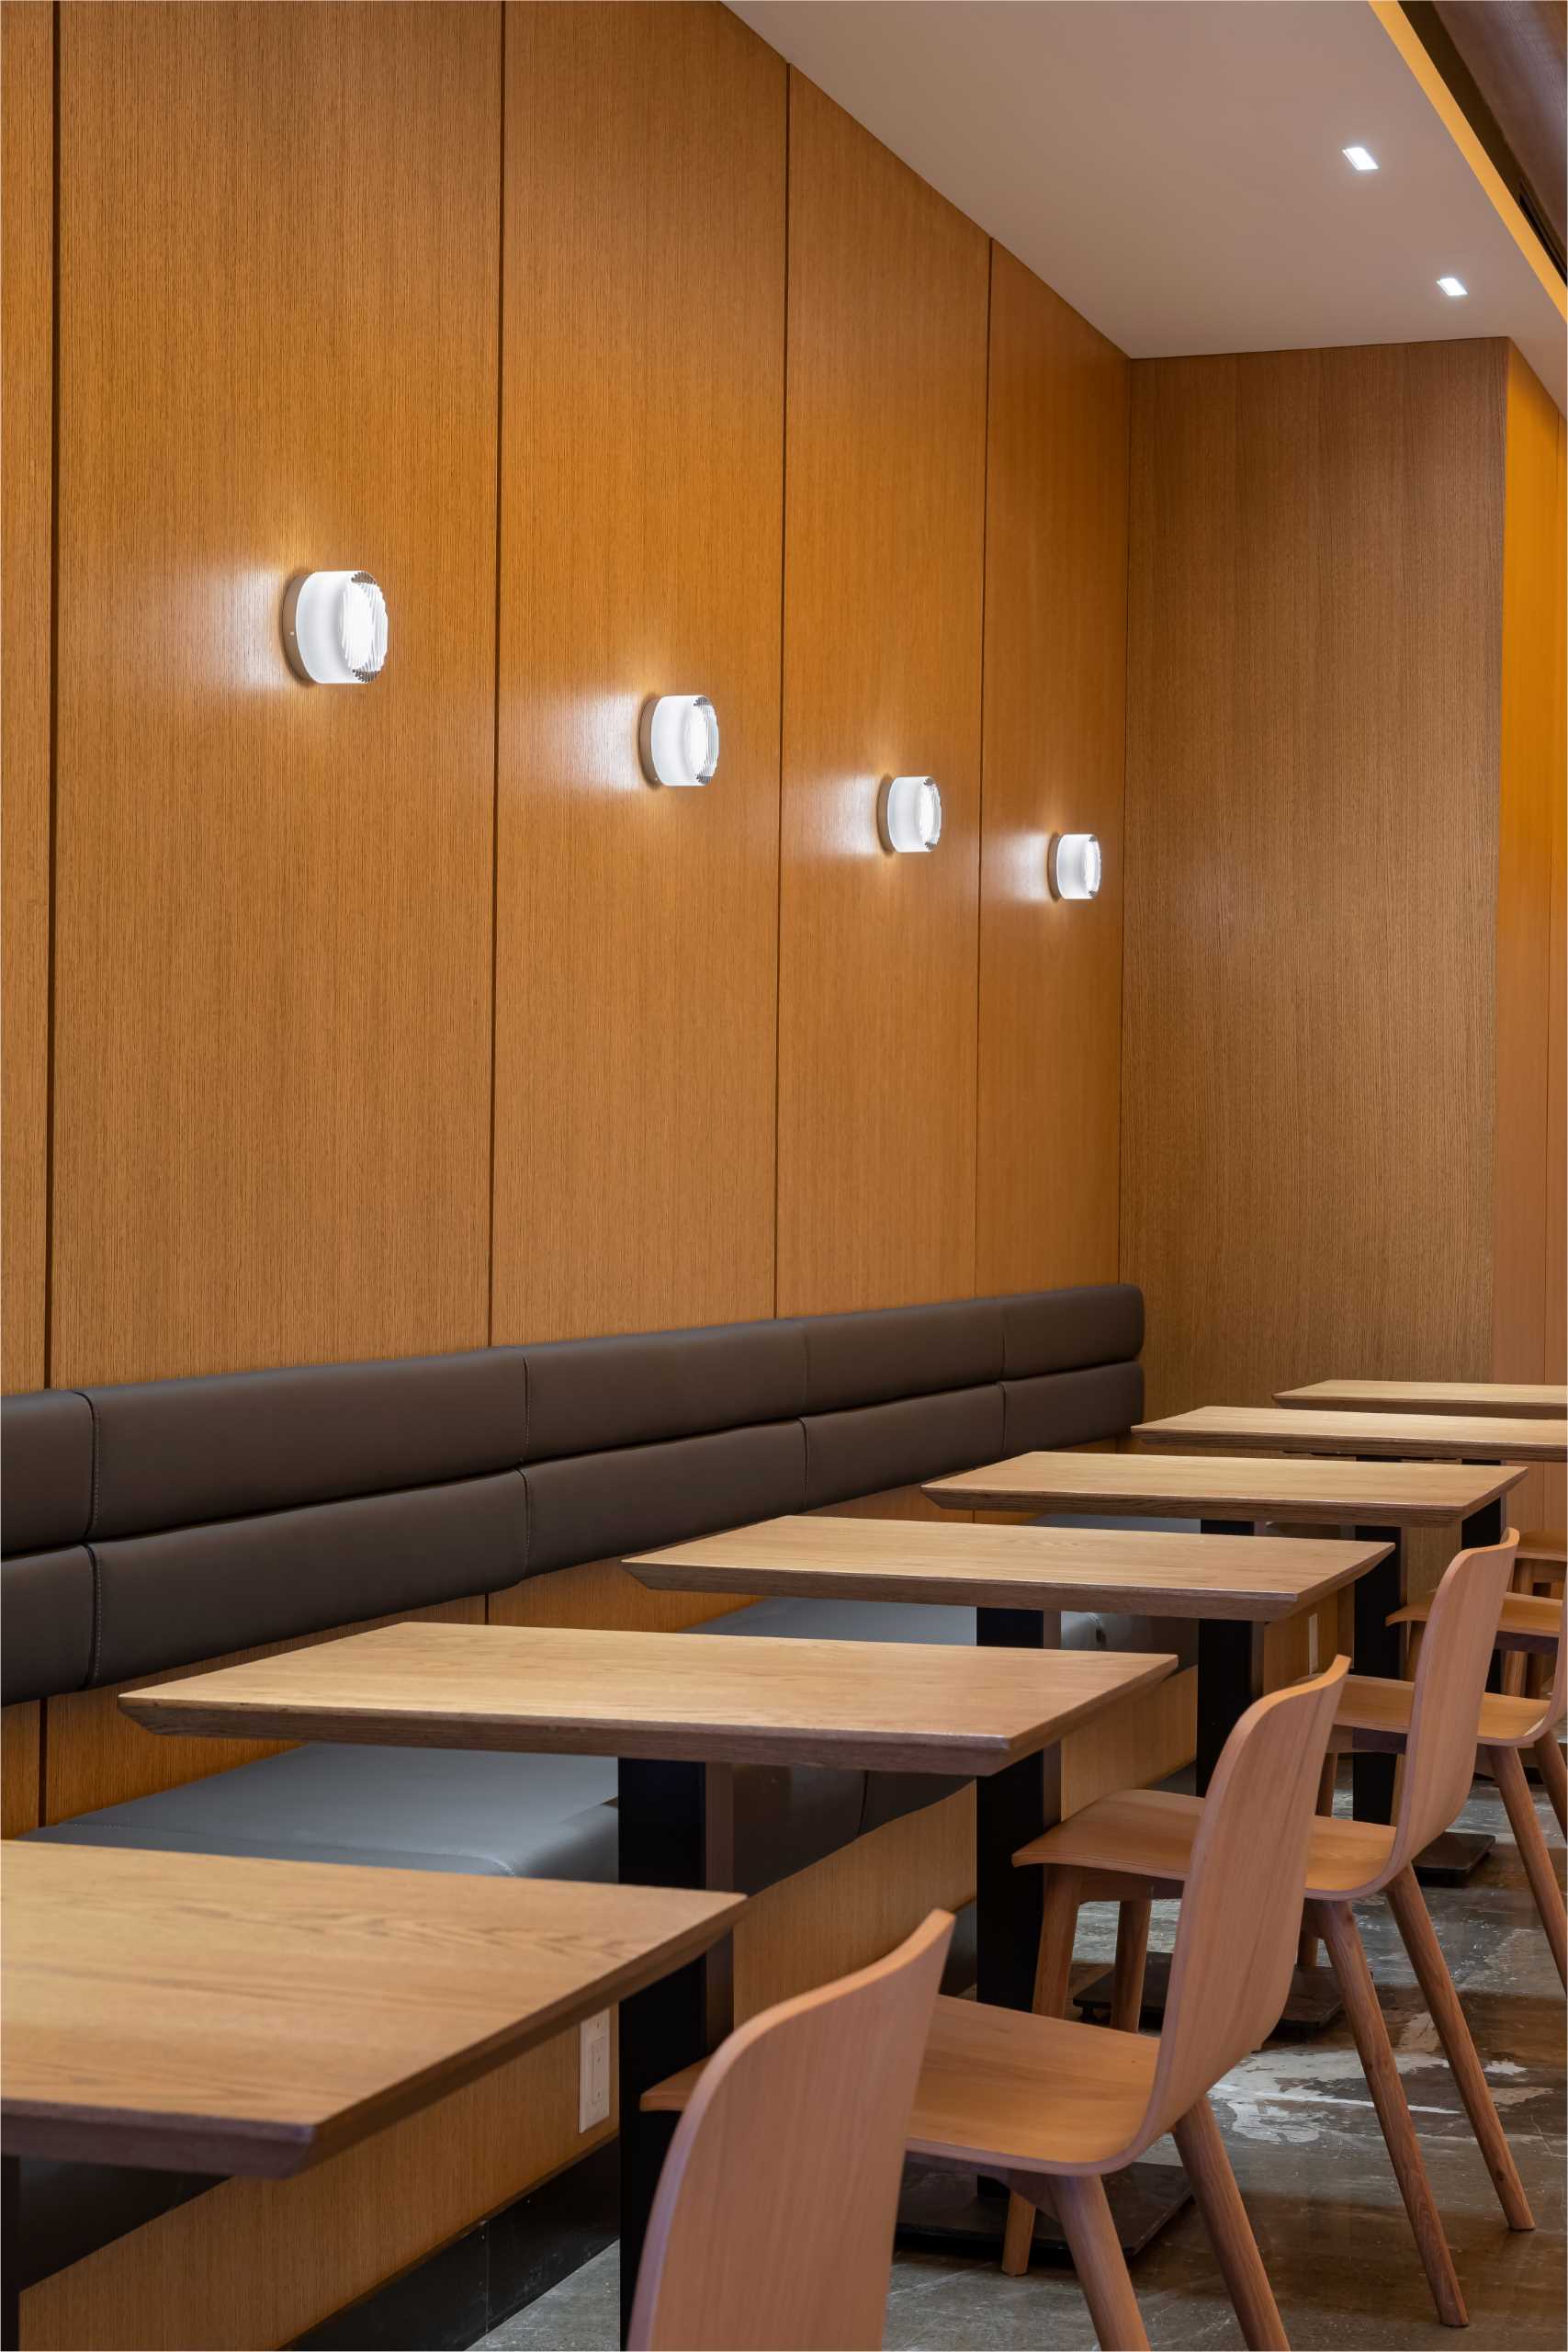 A modern cafe with upholstered banquette seating and wall sconces.